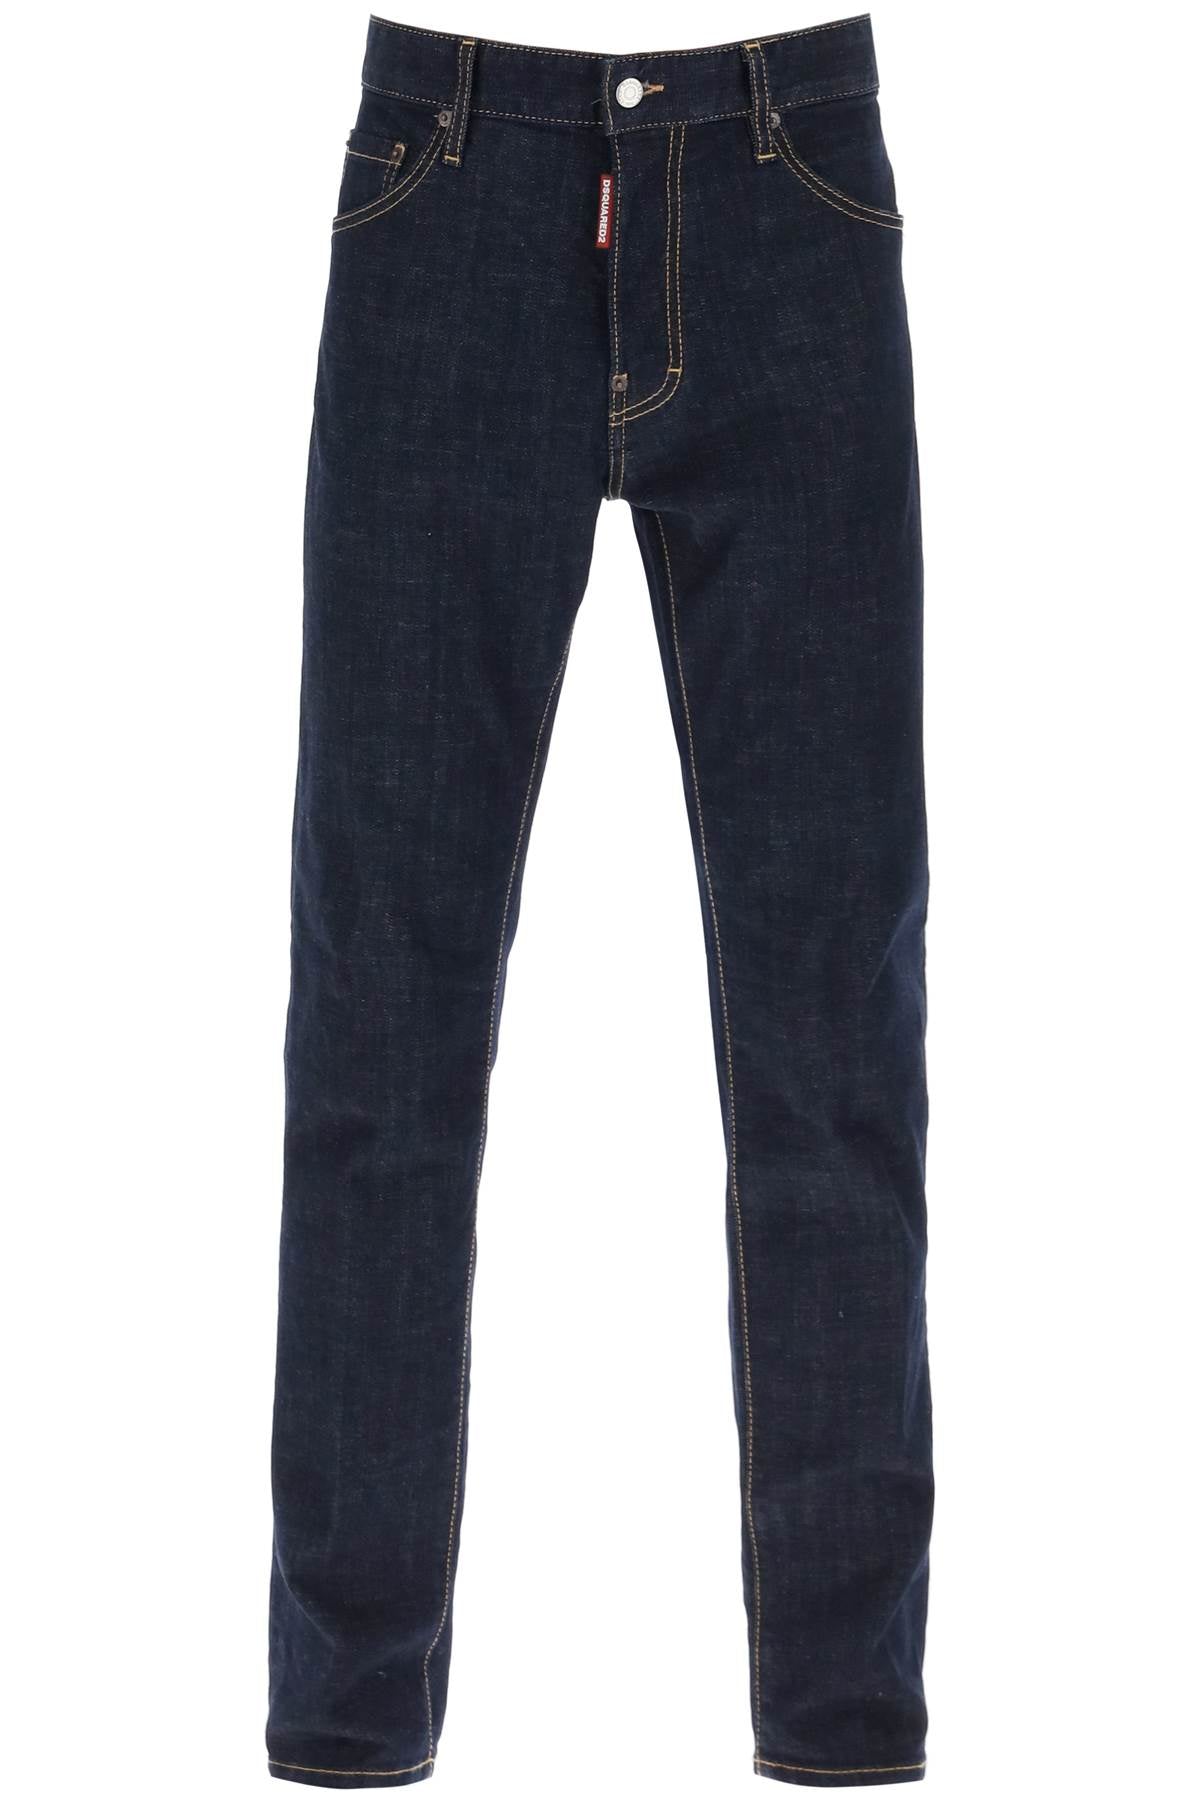 Dsquared2 cool guy jeans in dark rinse wash-0